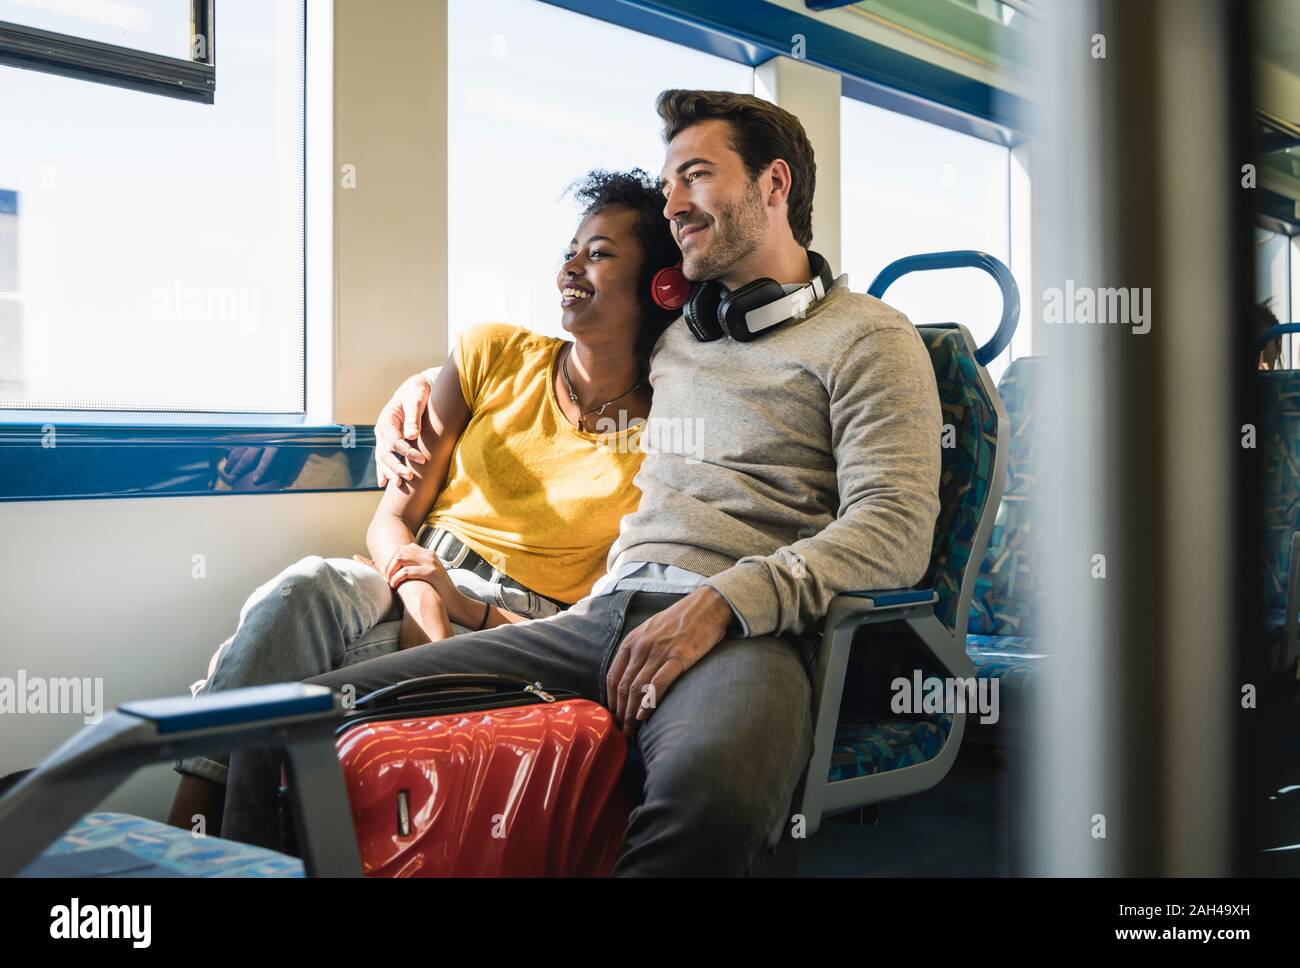 Young couple relaxing in a train Stock Photo